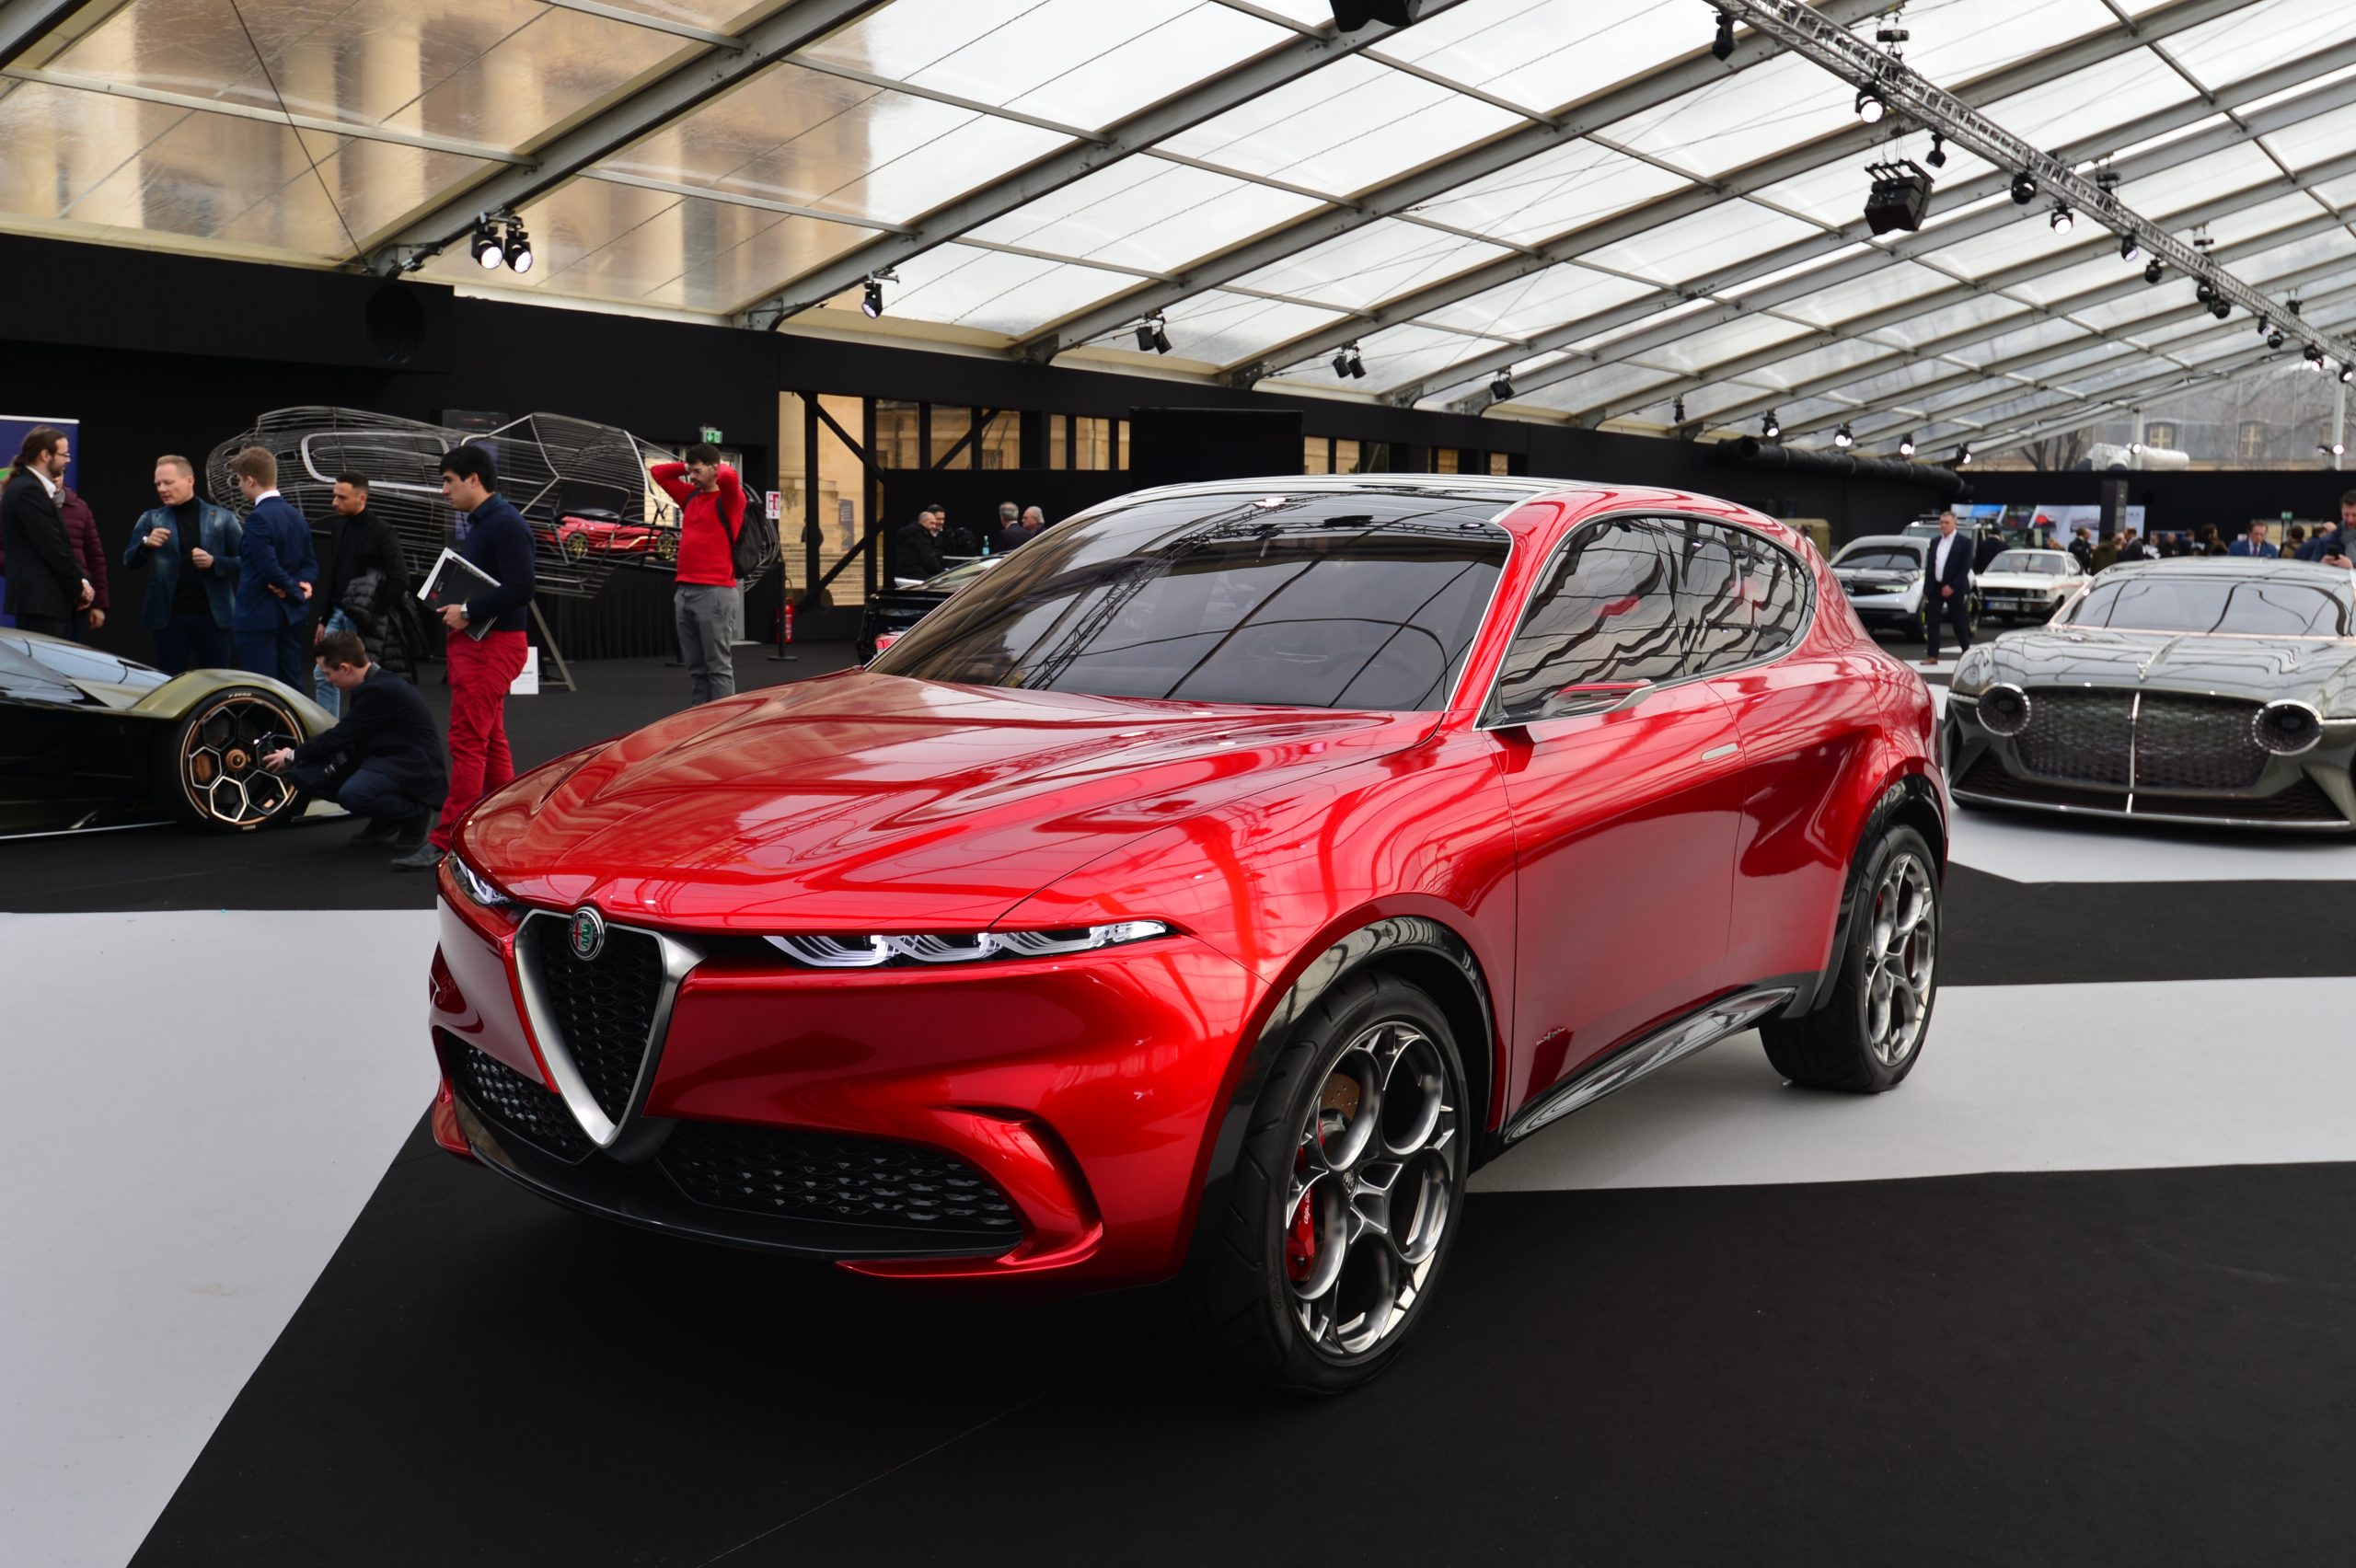 A red Alfa Romeo Tonale concept model displayed at the Paris Festival Automobile International with concept cars and automotive design exhibition.